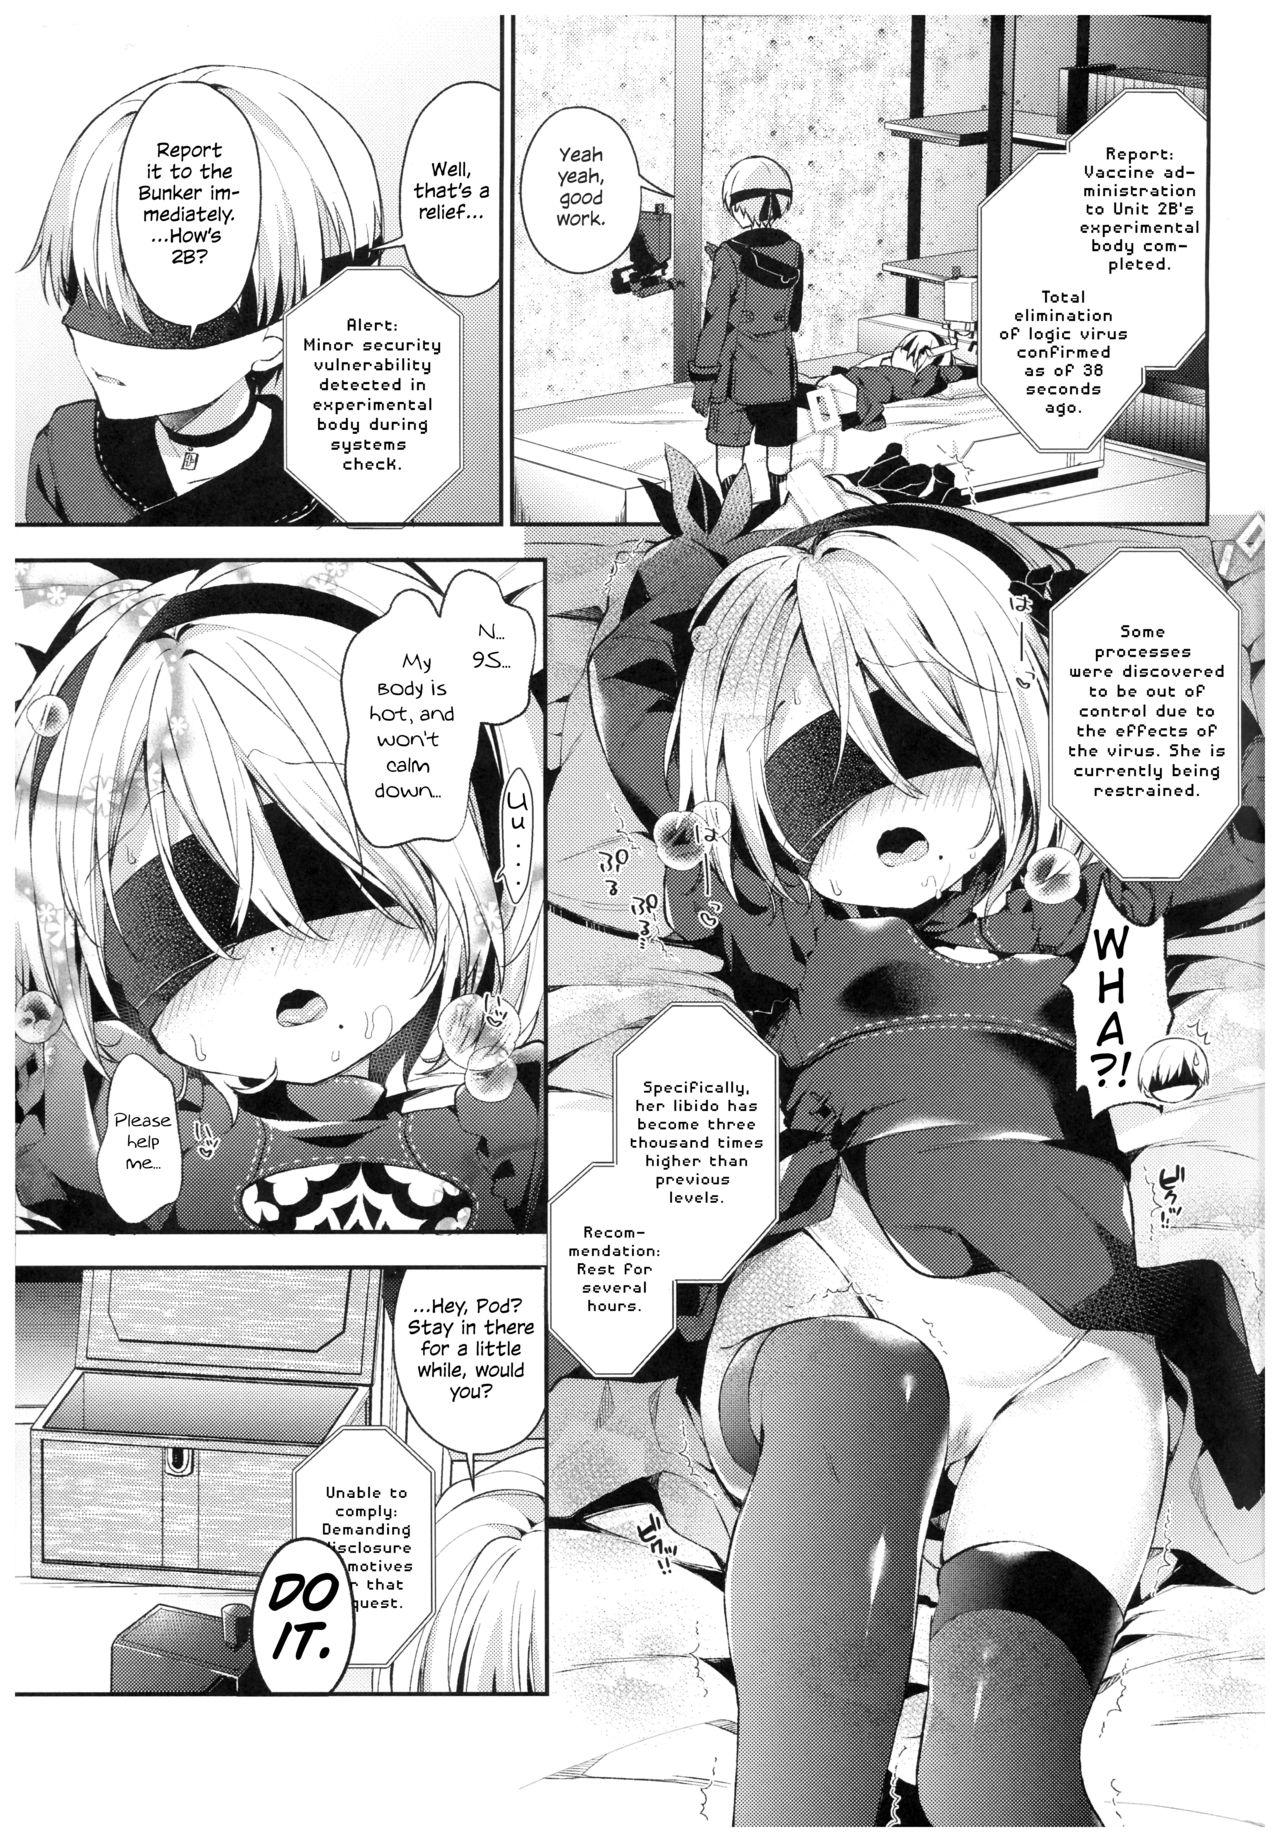 Old Vs Young 【TOP SECRET】 Notice of Precautionary Measures Regarding The Handling Of YoRHa No.2 Type B Resource Conservation Fuselage - Nier automata Piss - Page 4